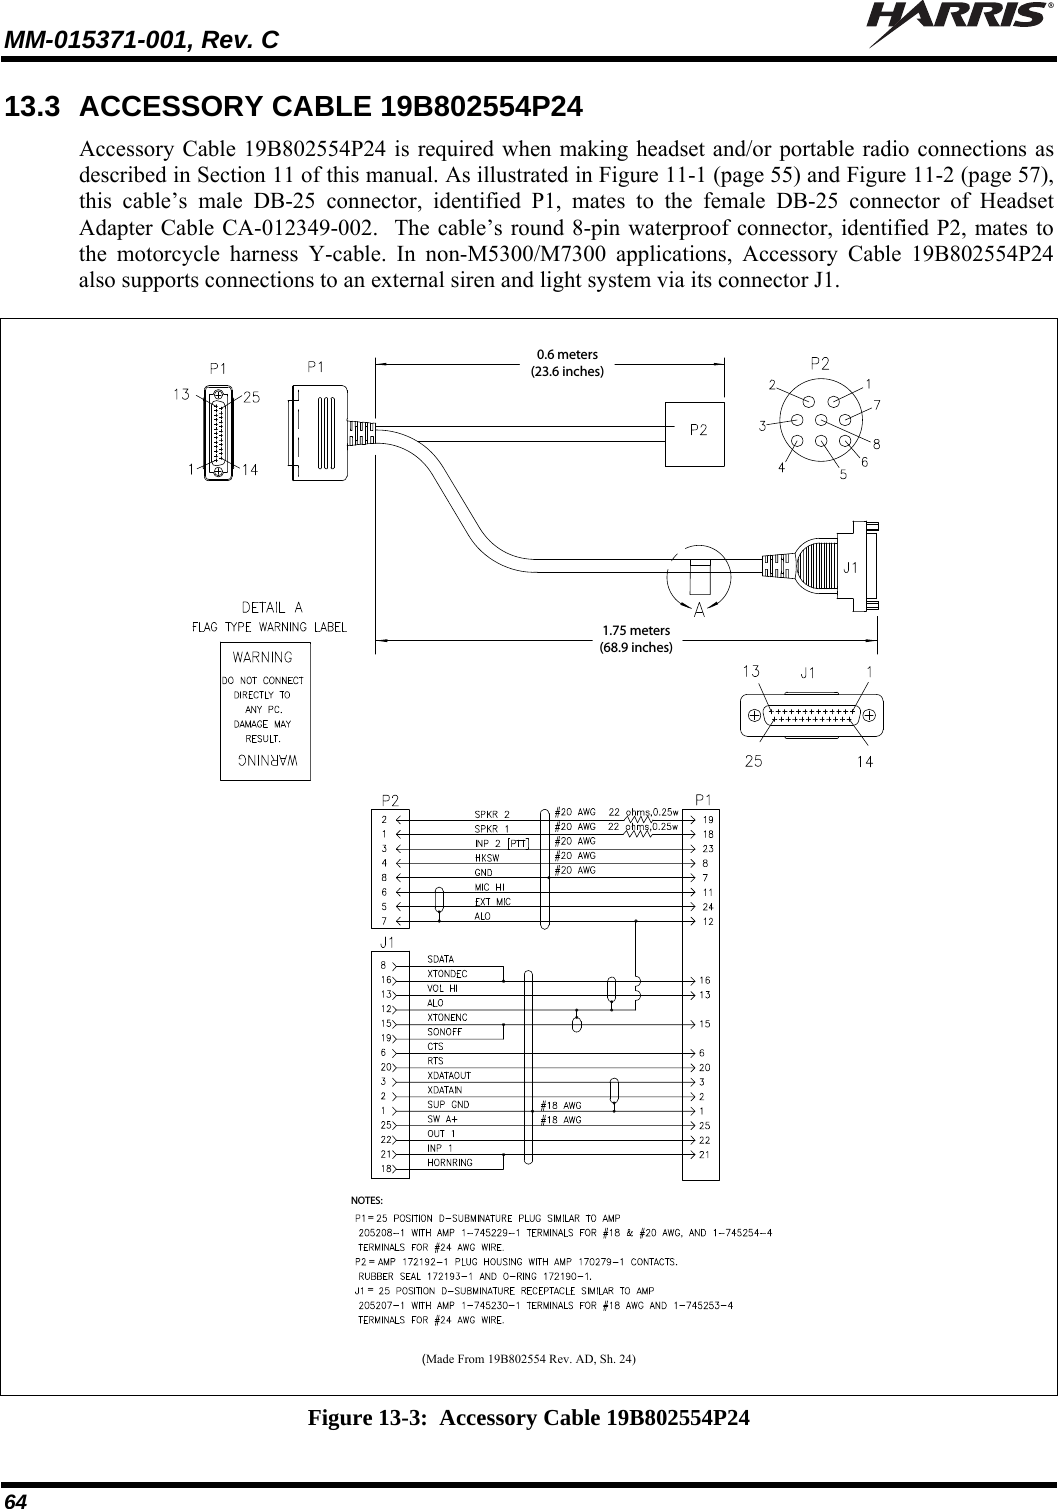 MM-015371-001, Rev. C   64 13.3  ACCESSORY CABLE 19B802554P24 Accessory Cable 19B802554P24 is required when making headset and/or portable radio connections as described in Section 11 of this manual. As illustrated in Figure 11-1 (page 55) and Figure 11-2 (page 57), this cable’s male DB-25 connector, identified P1, mates to the female DB-25 connector of Headset Adapter Cable CA-012349-002.  The cable’s round 8-pin waterproof connector, identified P2, mates to the motorcycle harness Y-cable. In non-M5300/M7300 applications, Accessory Cable 19B802554P24 also supports connections to an external siren and light system via its connector J1.  =NOTES:==0.6meters(23.6 inches)1.75 meters(68.9 inches)  (Made From 19B802554 Rev. AD, Sh. 24)  Figure 13-3:  Accessory Cable 19B802554P24 